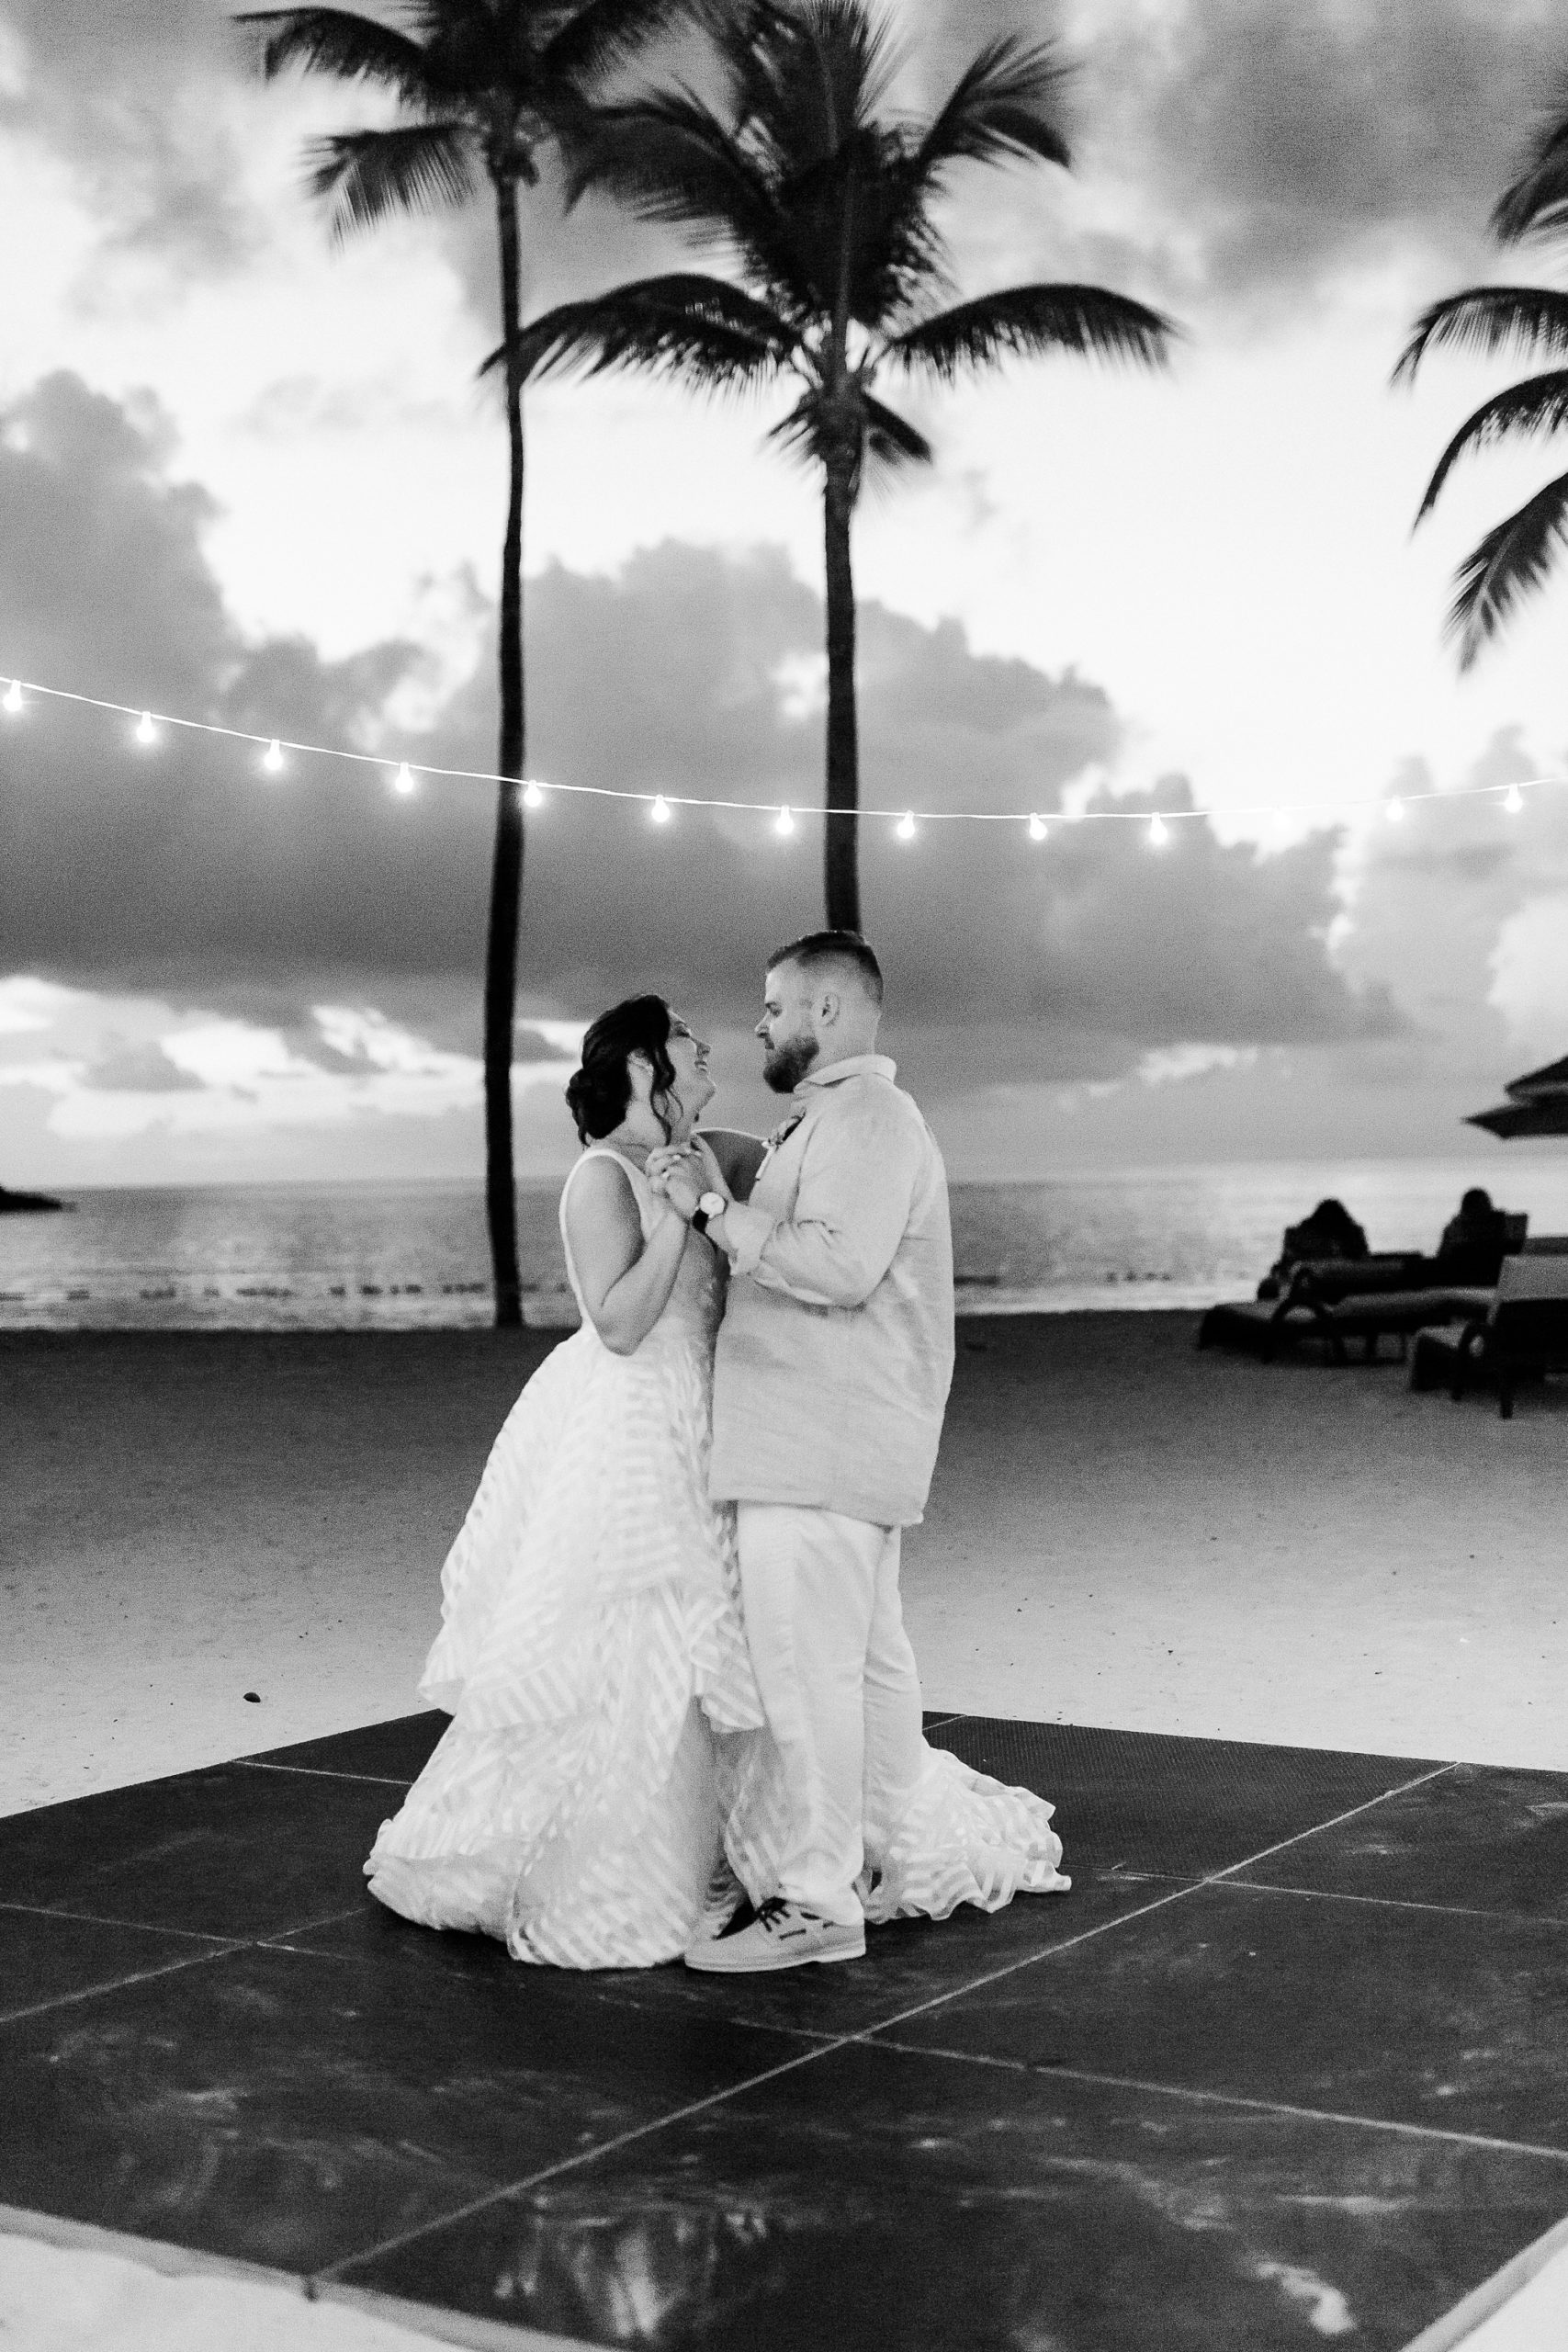 romantic first dance under string lights on the beach